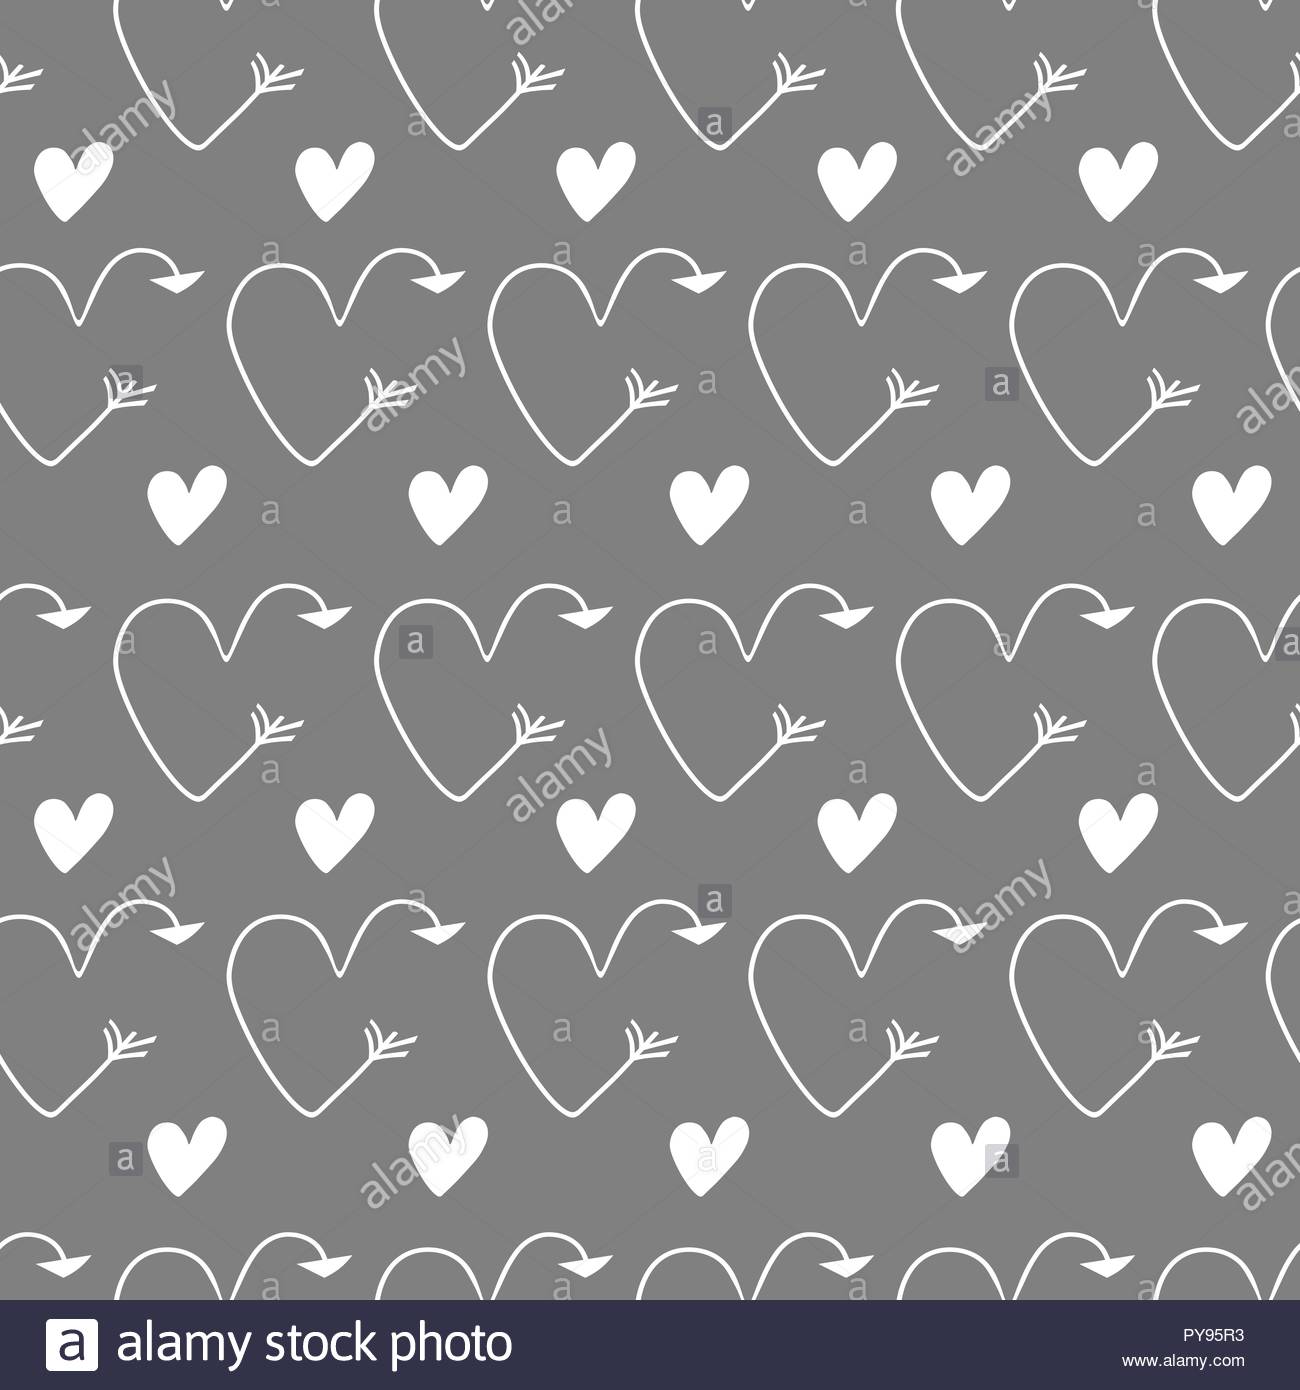 Grey Hearts In Form Of Arrows Seamless Vector Background For